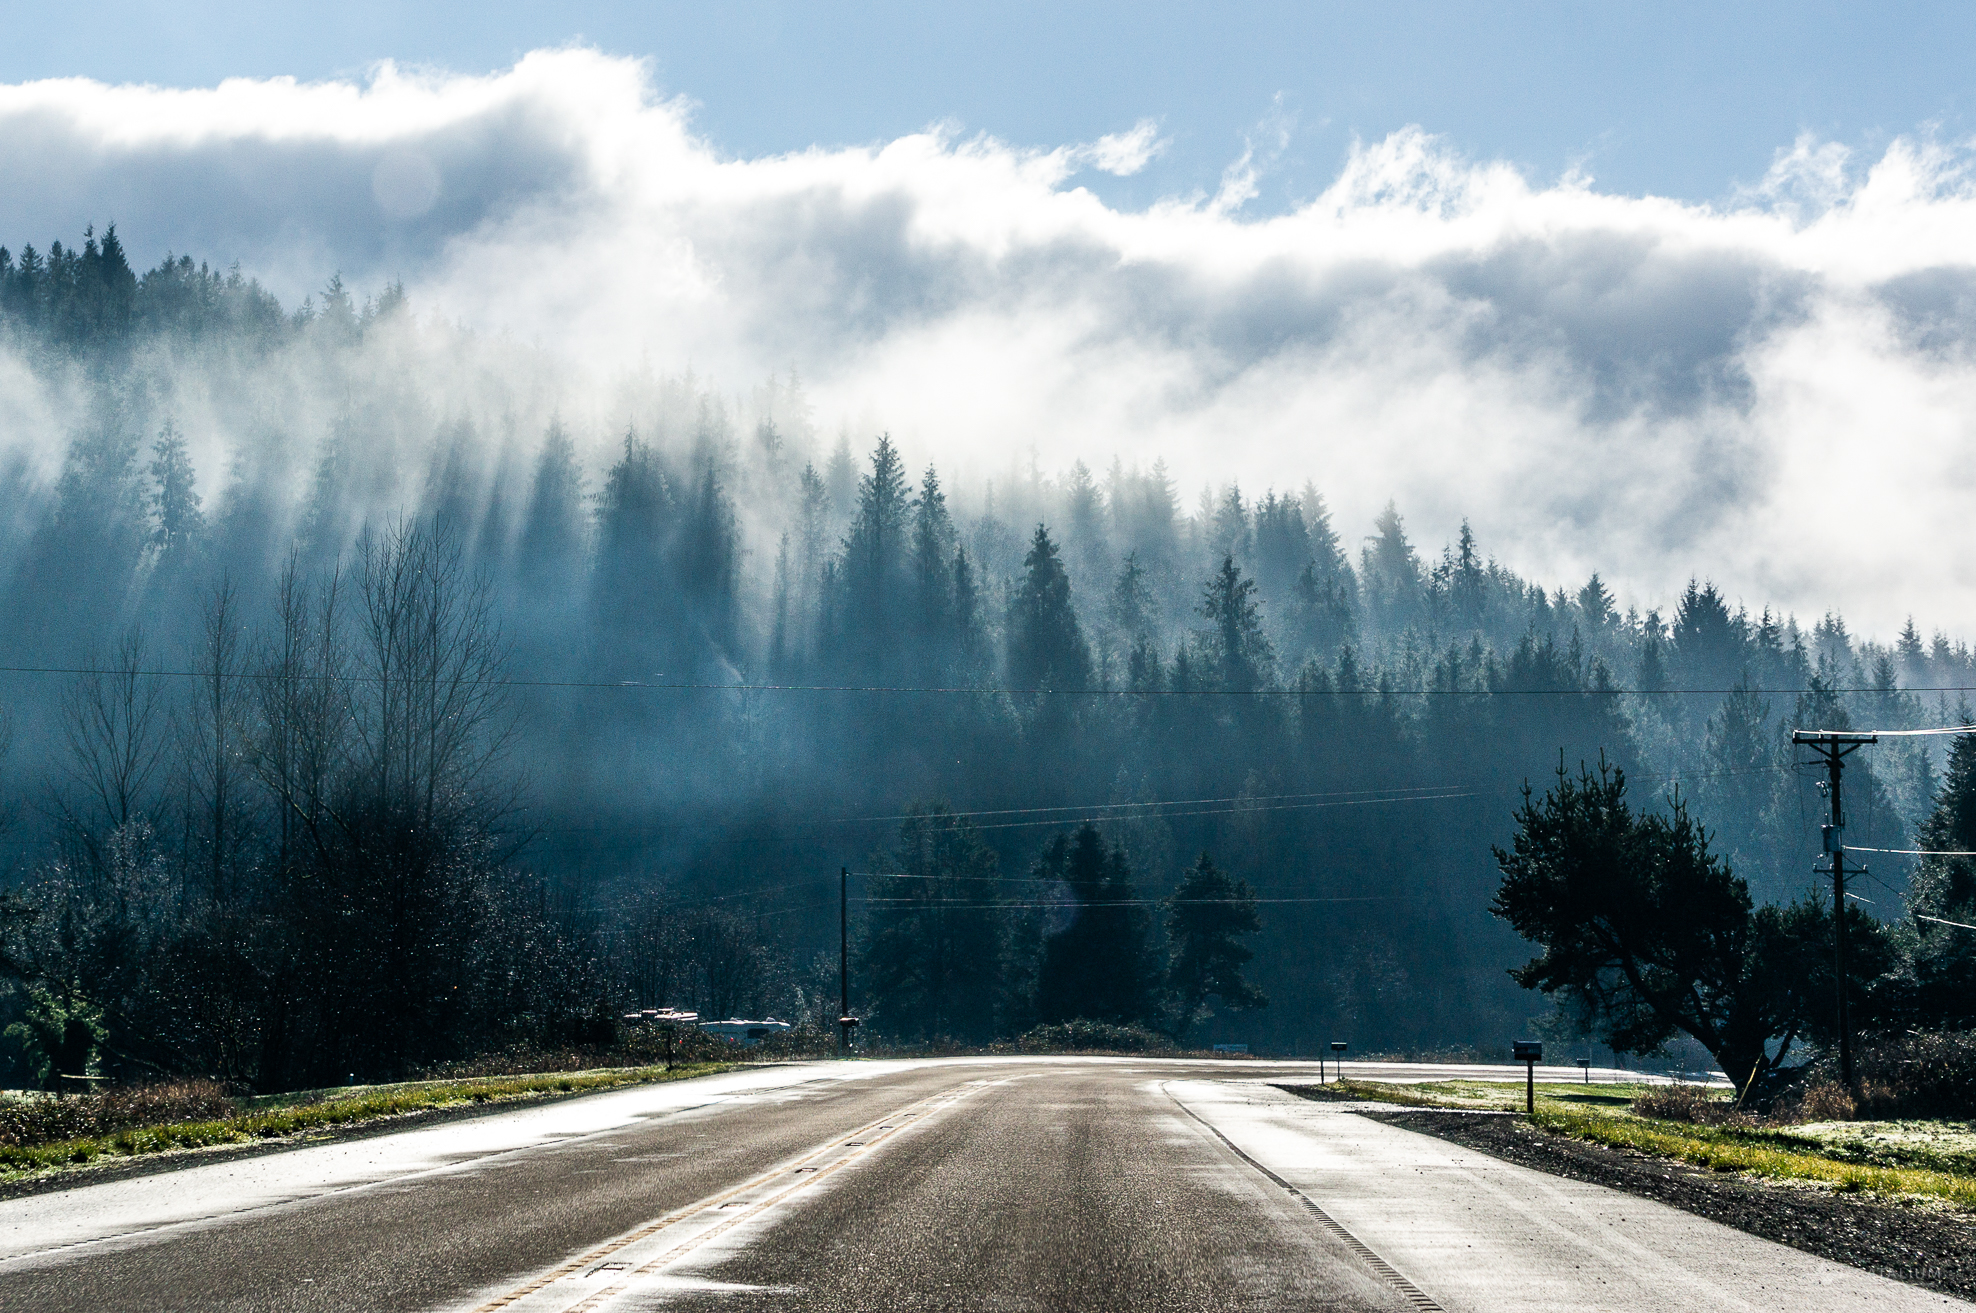 Cloud, road, and the forest